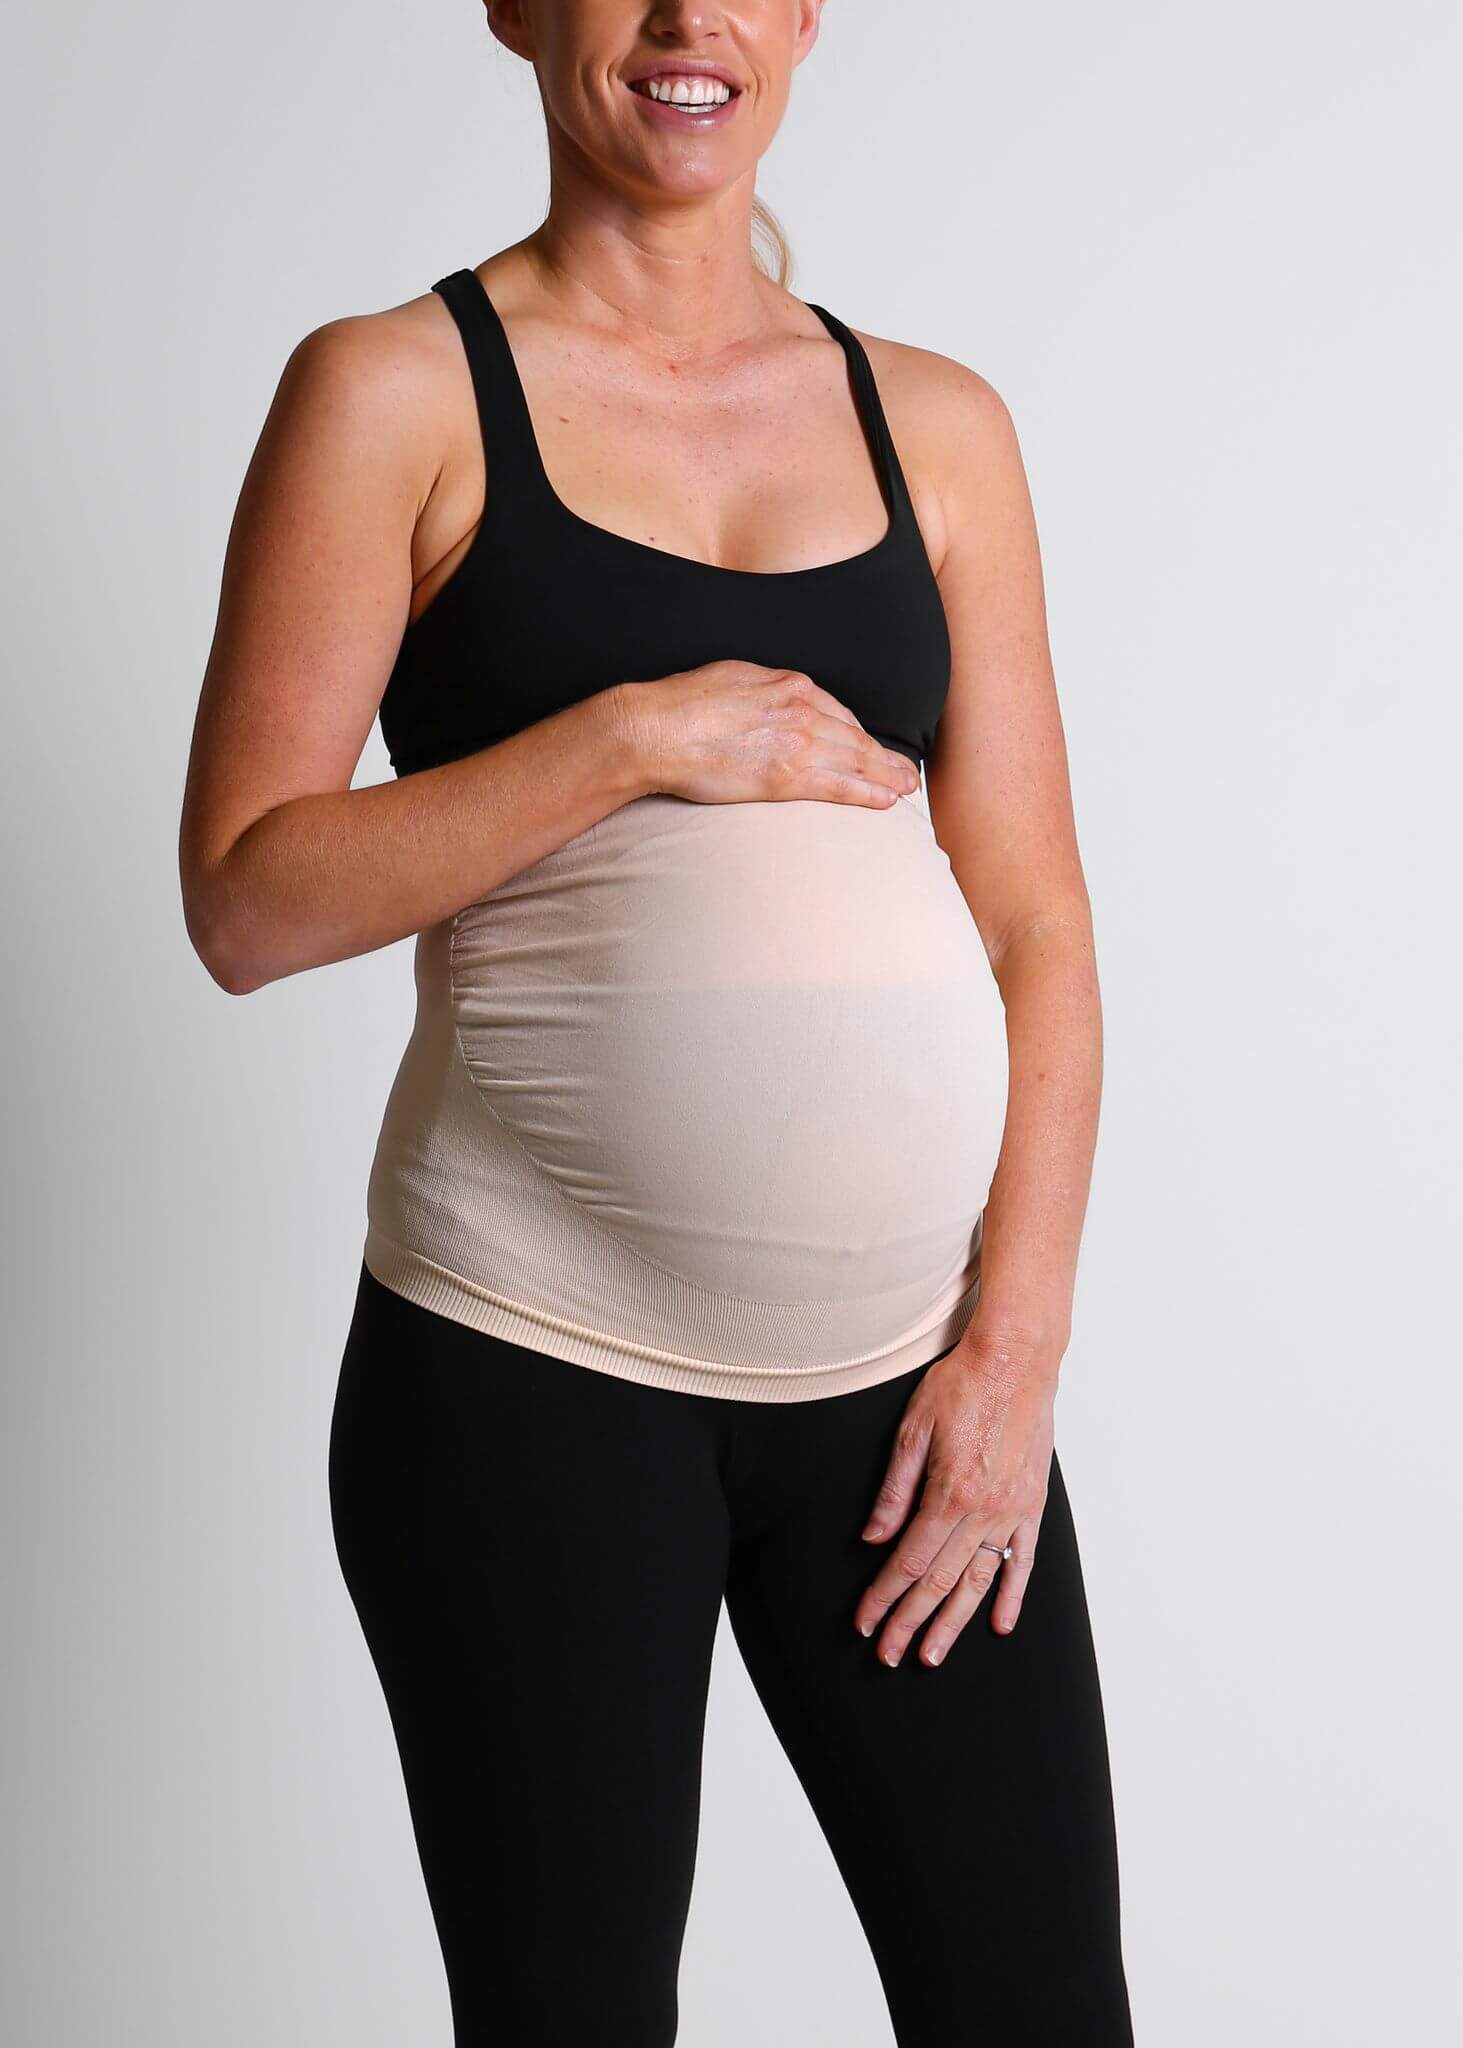 Health　Restore　compression　Bespoke　Pregnancy　sleeve　Physiotherapy